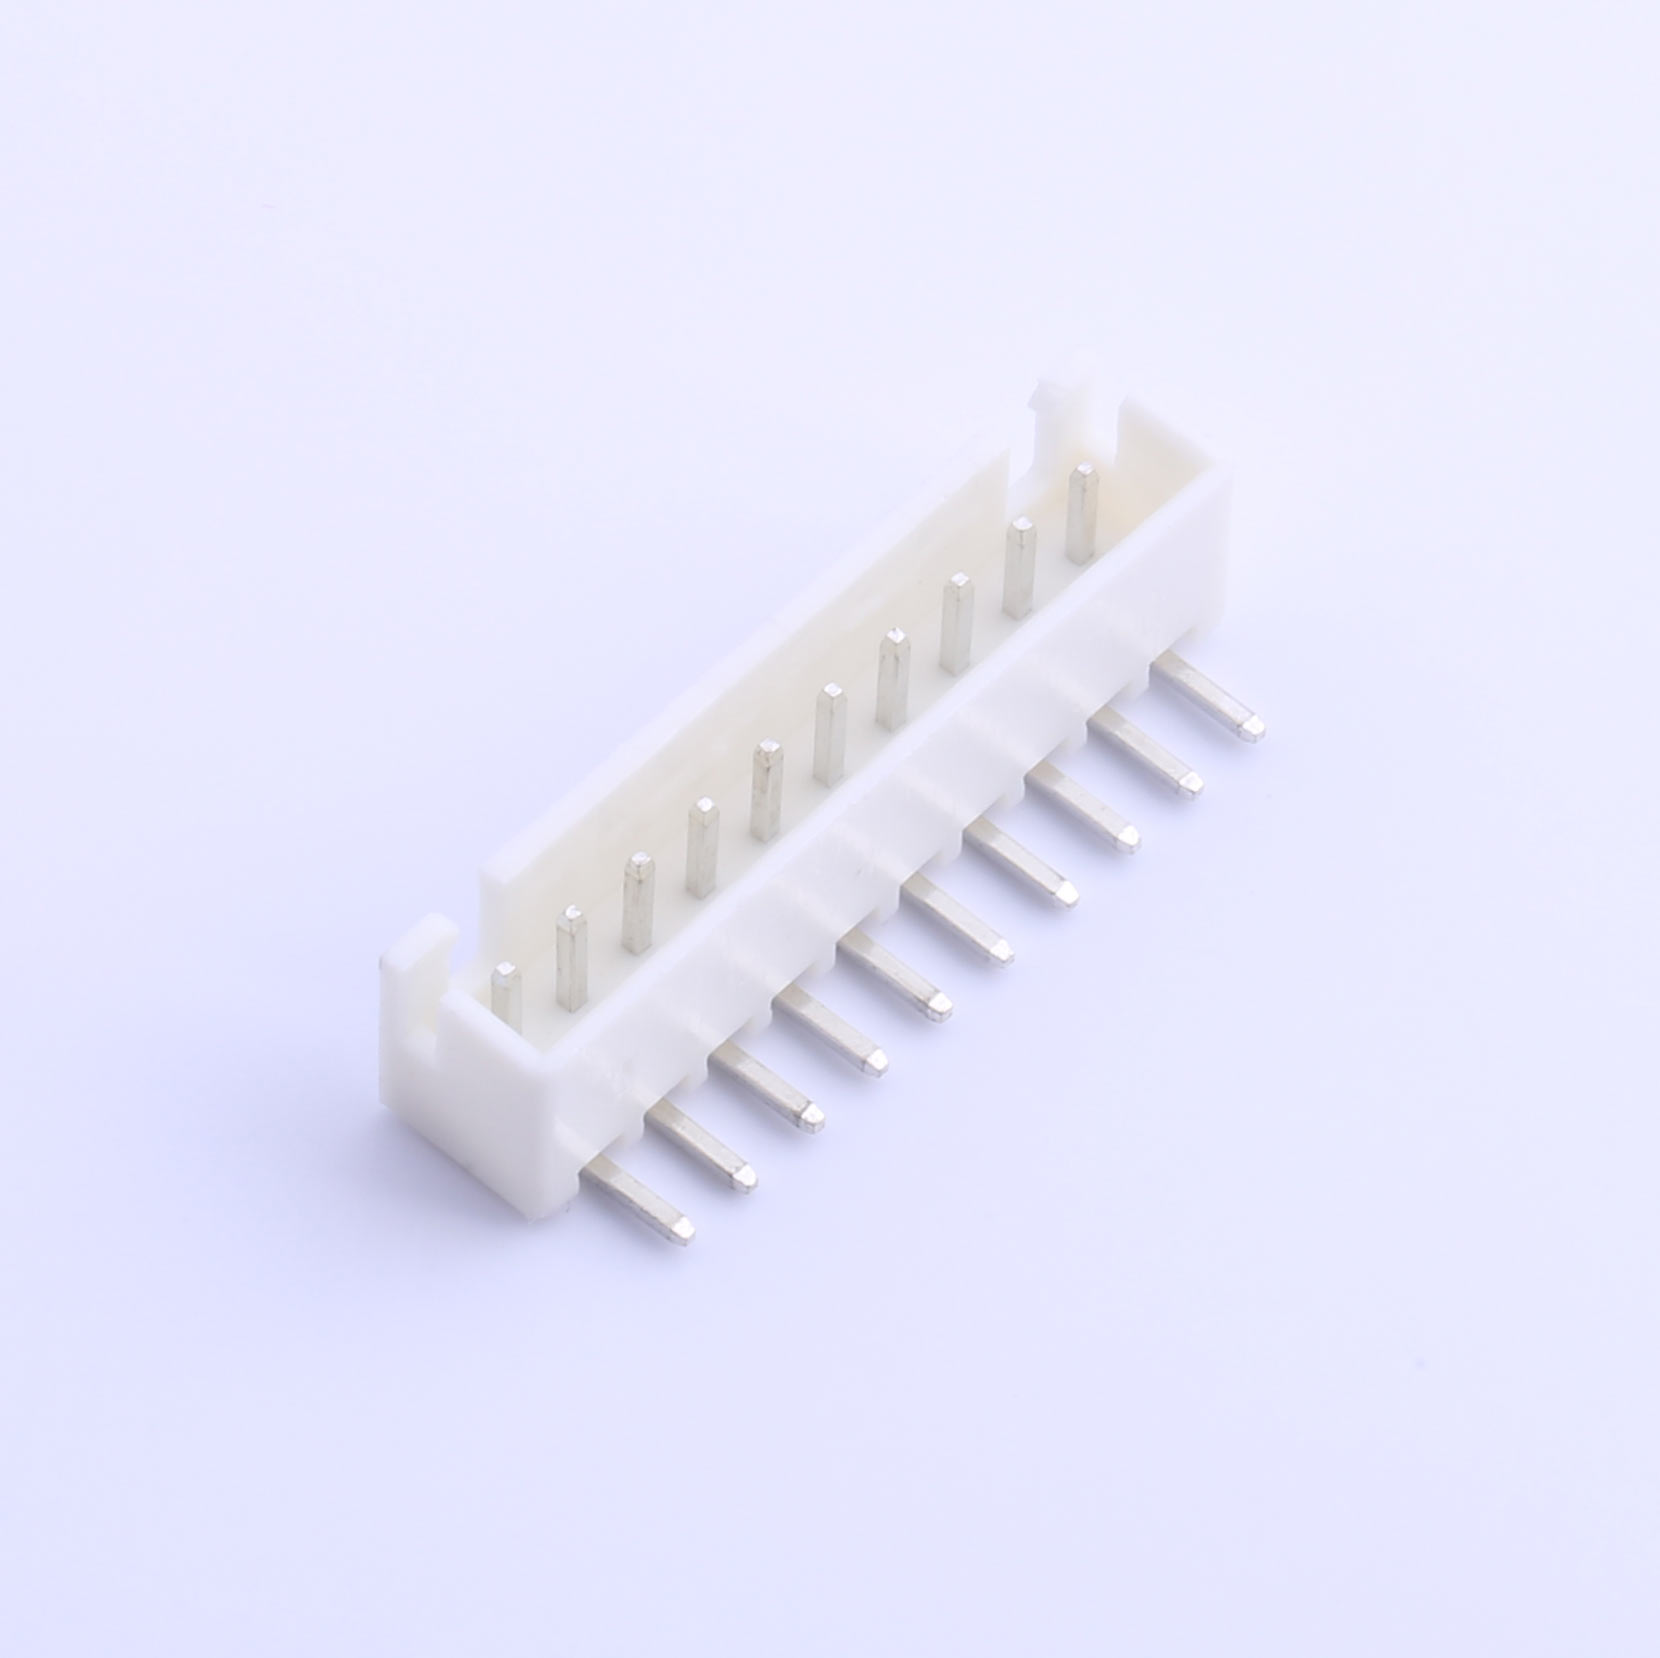 Kinghelm Wire to Board Connector XH connector- KH-XH-10A-W